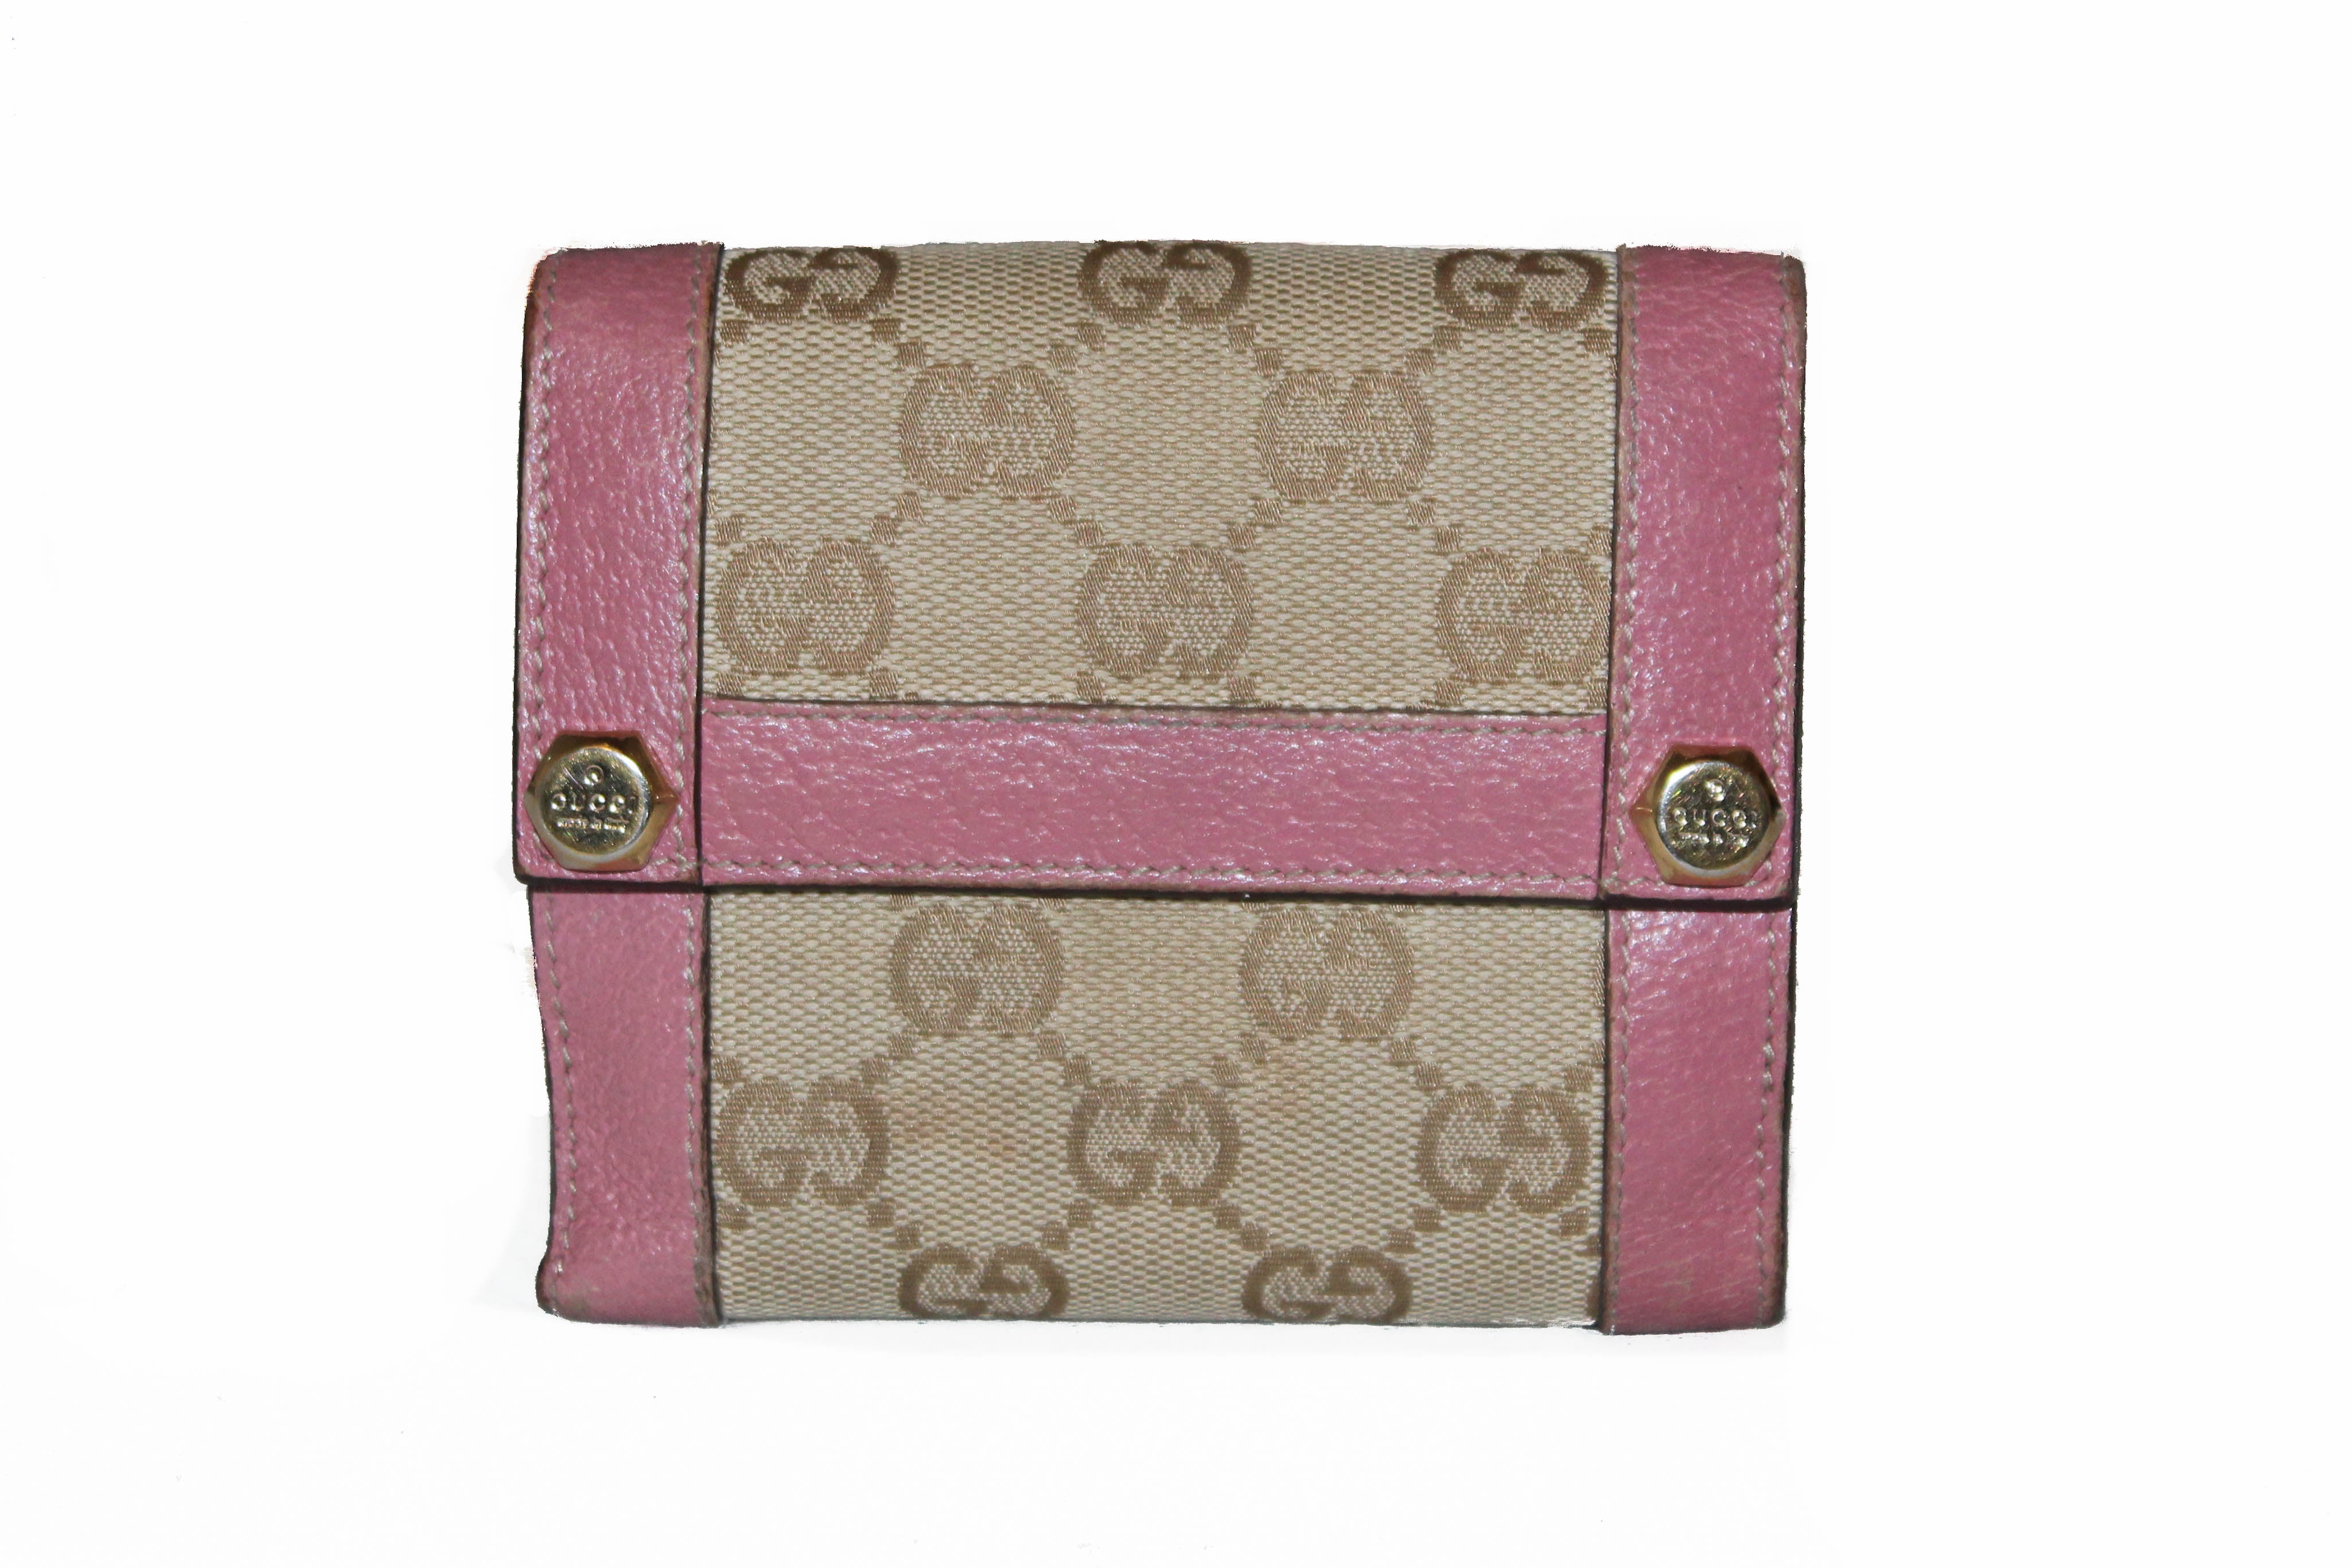 Authentic Gucci Beige GG Signature with Pink Leather Trim Small Wallet